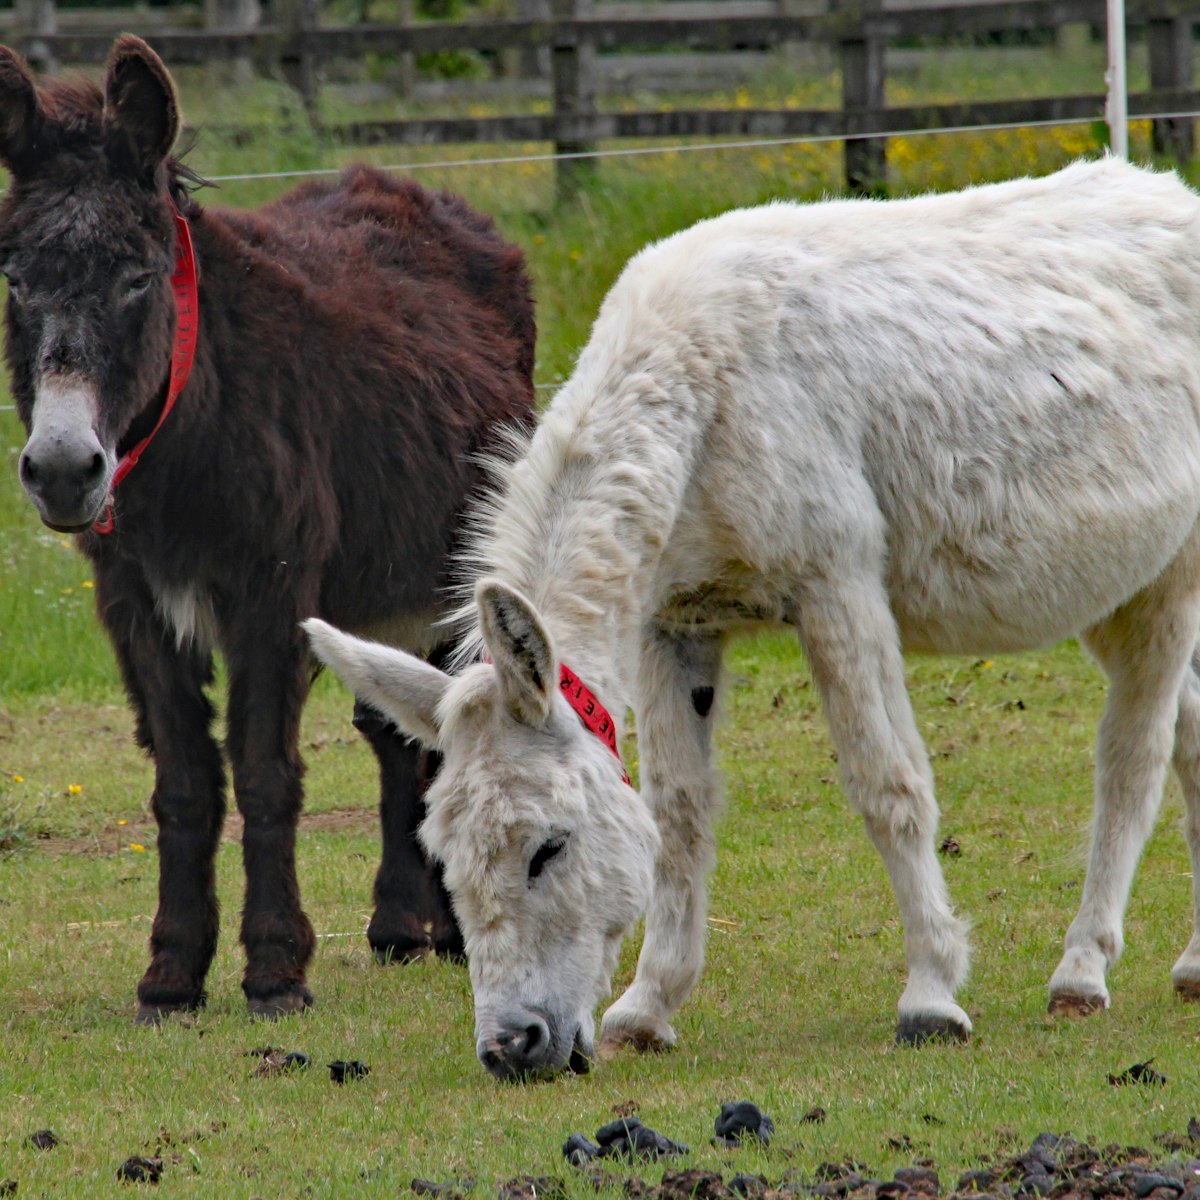 Two donkeys graze in their paddock at the Donkey Sanctuary in Sidmouth.